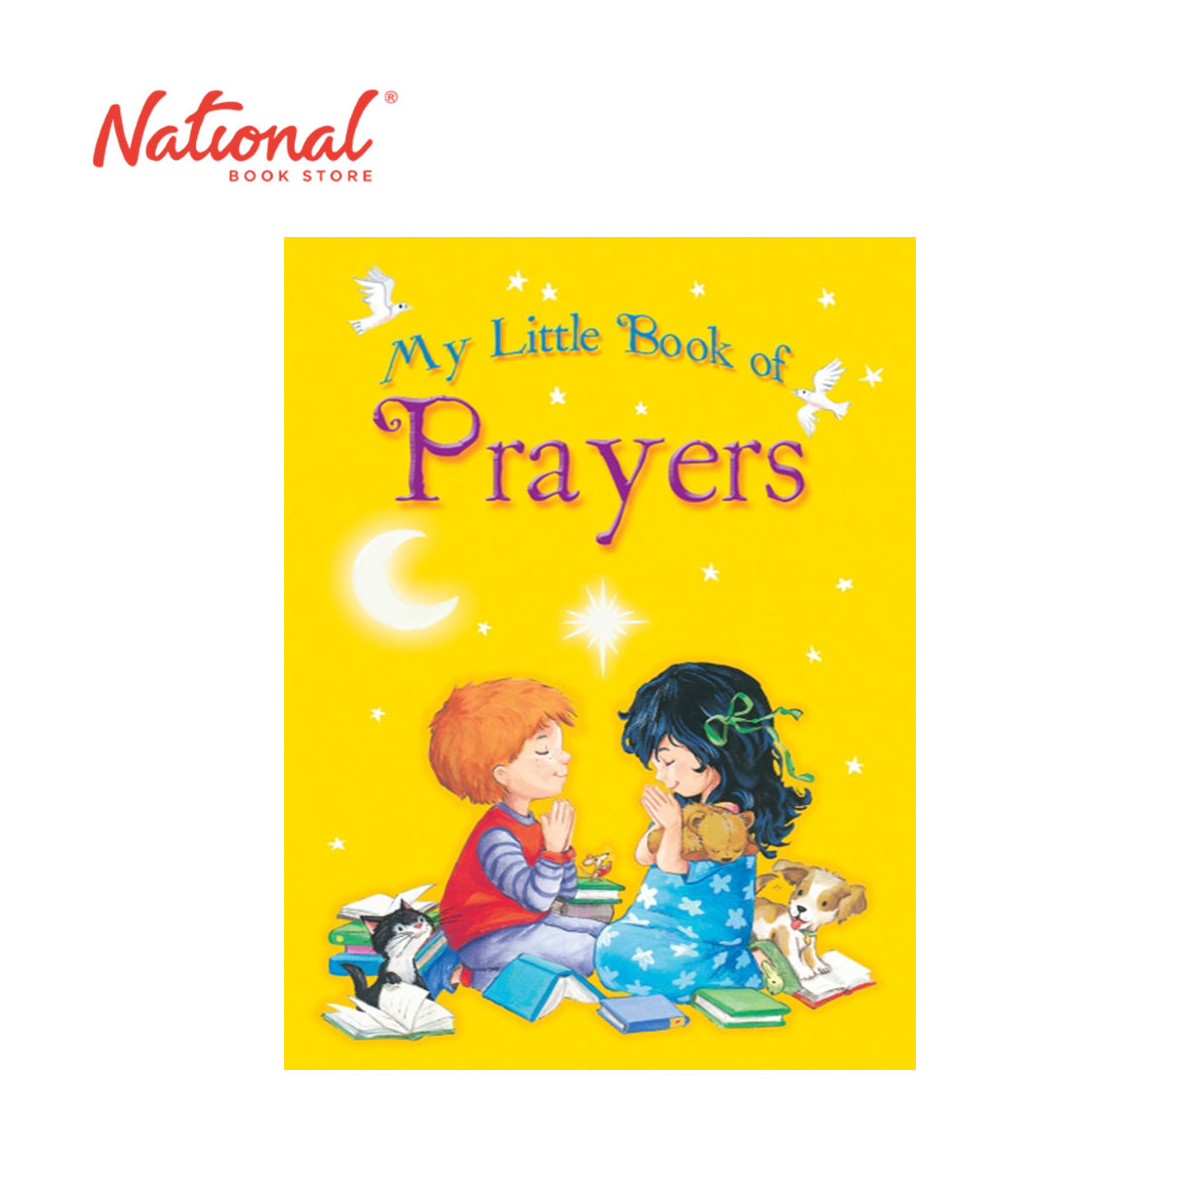 My Little Book of Prayers - Hardcover - Inspirational for Kids